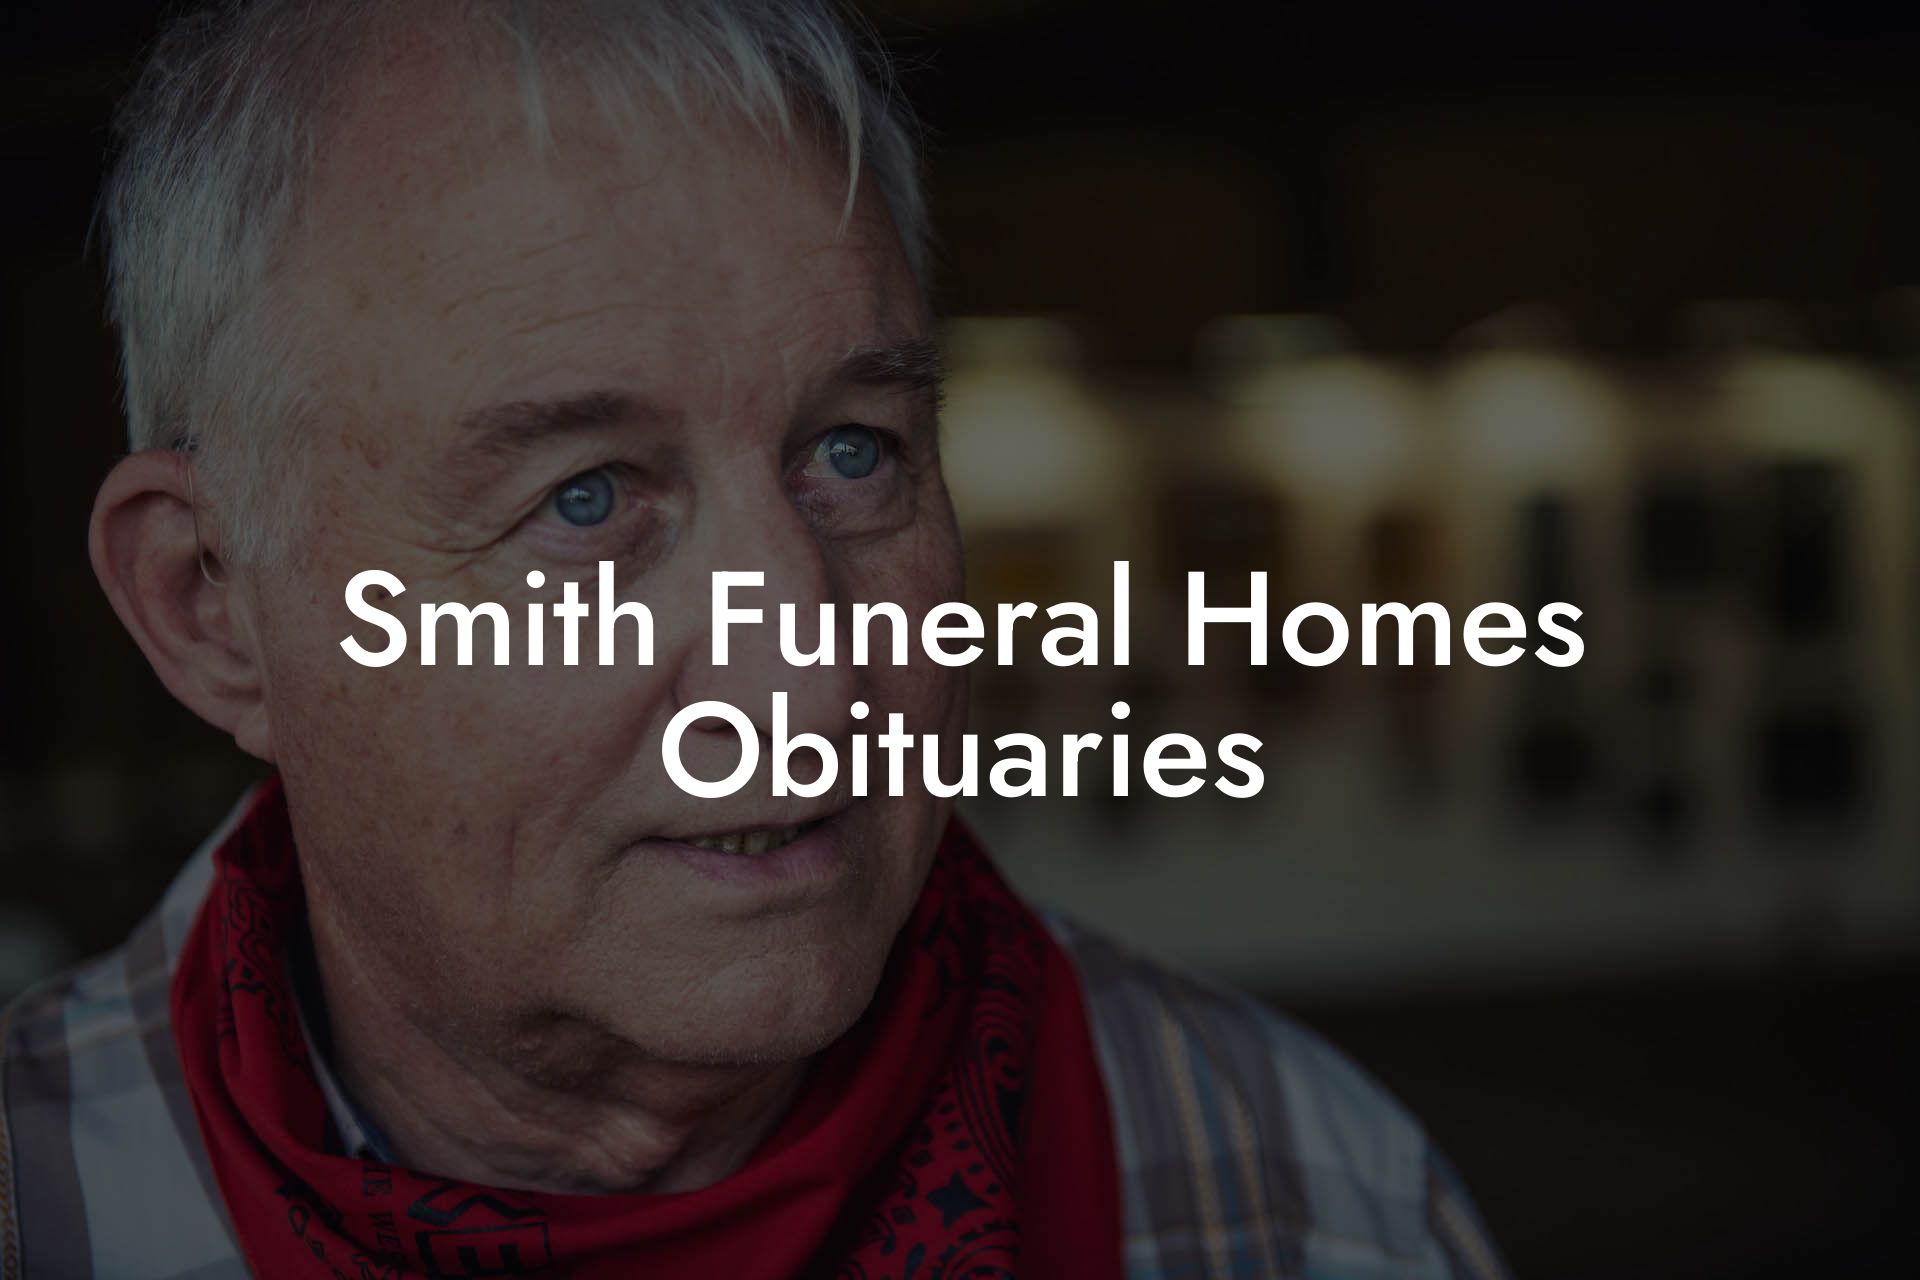 Smith Funeral Homes Obituaries